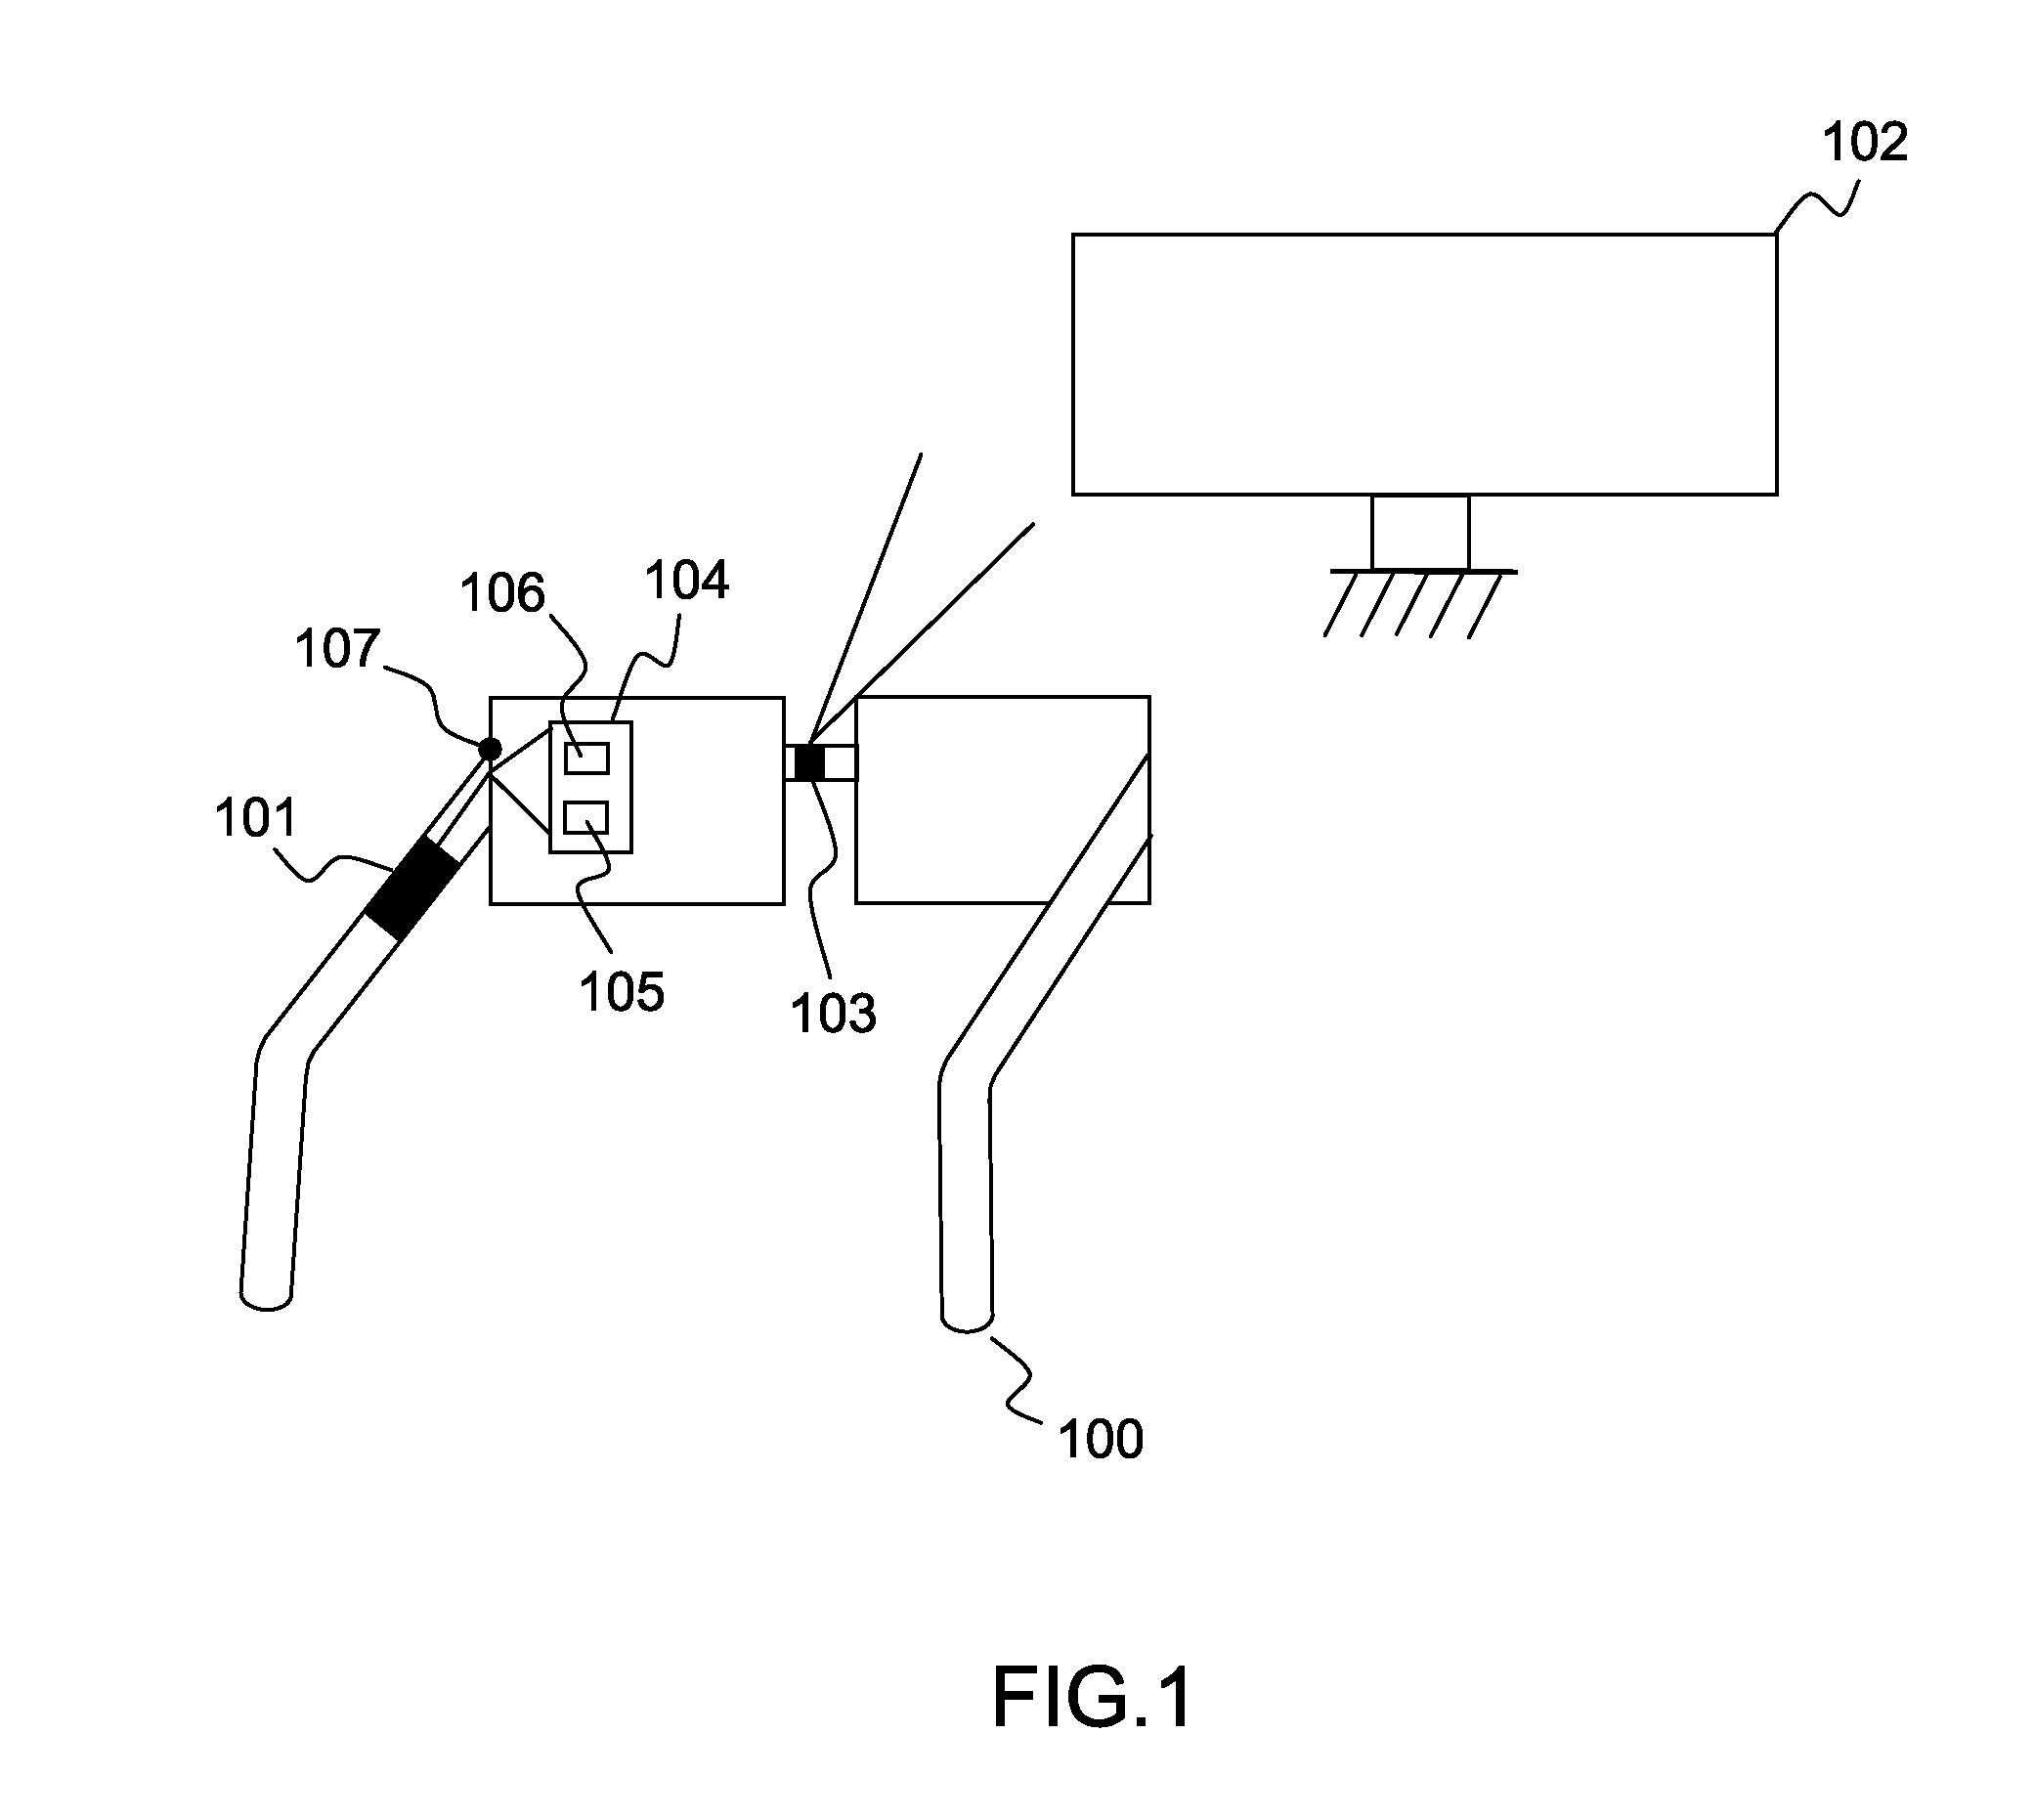 Display method through a head mounted device